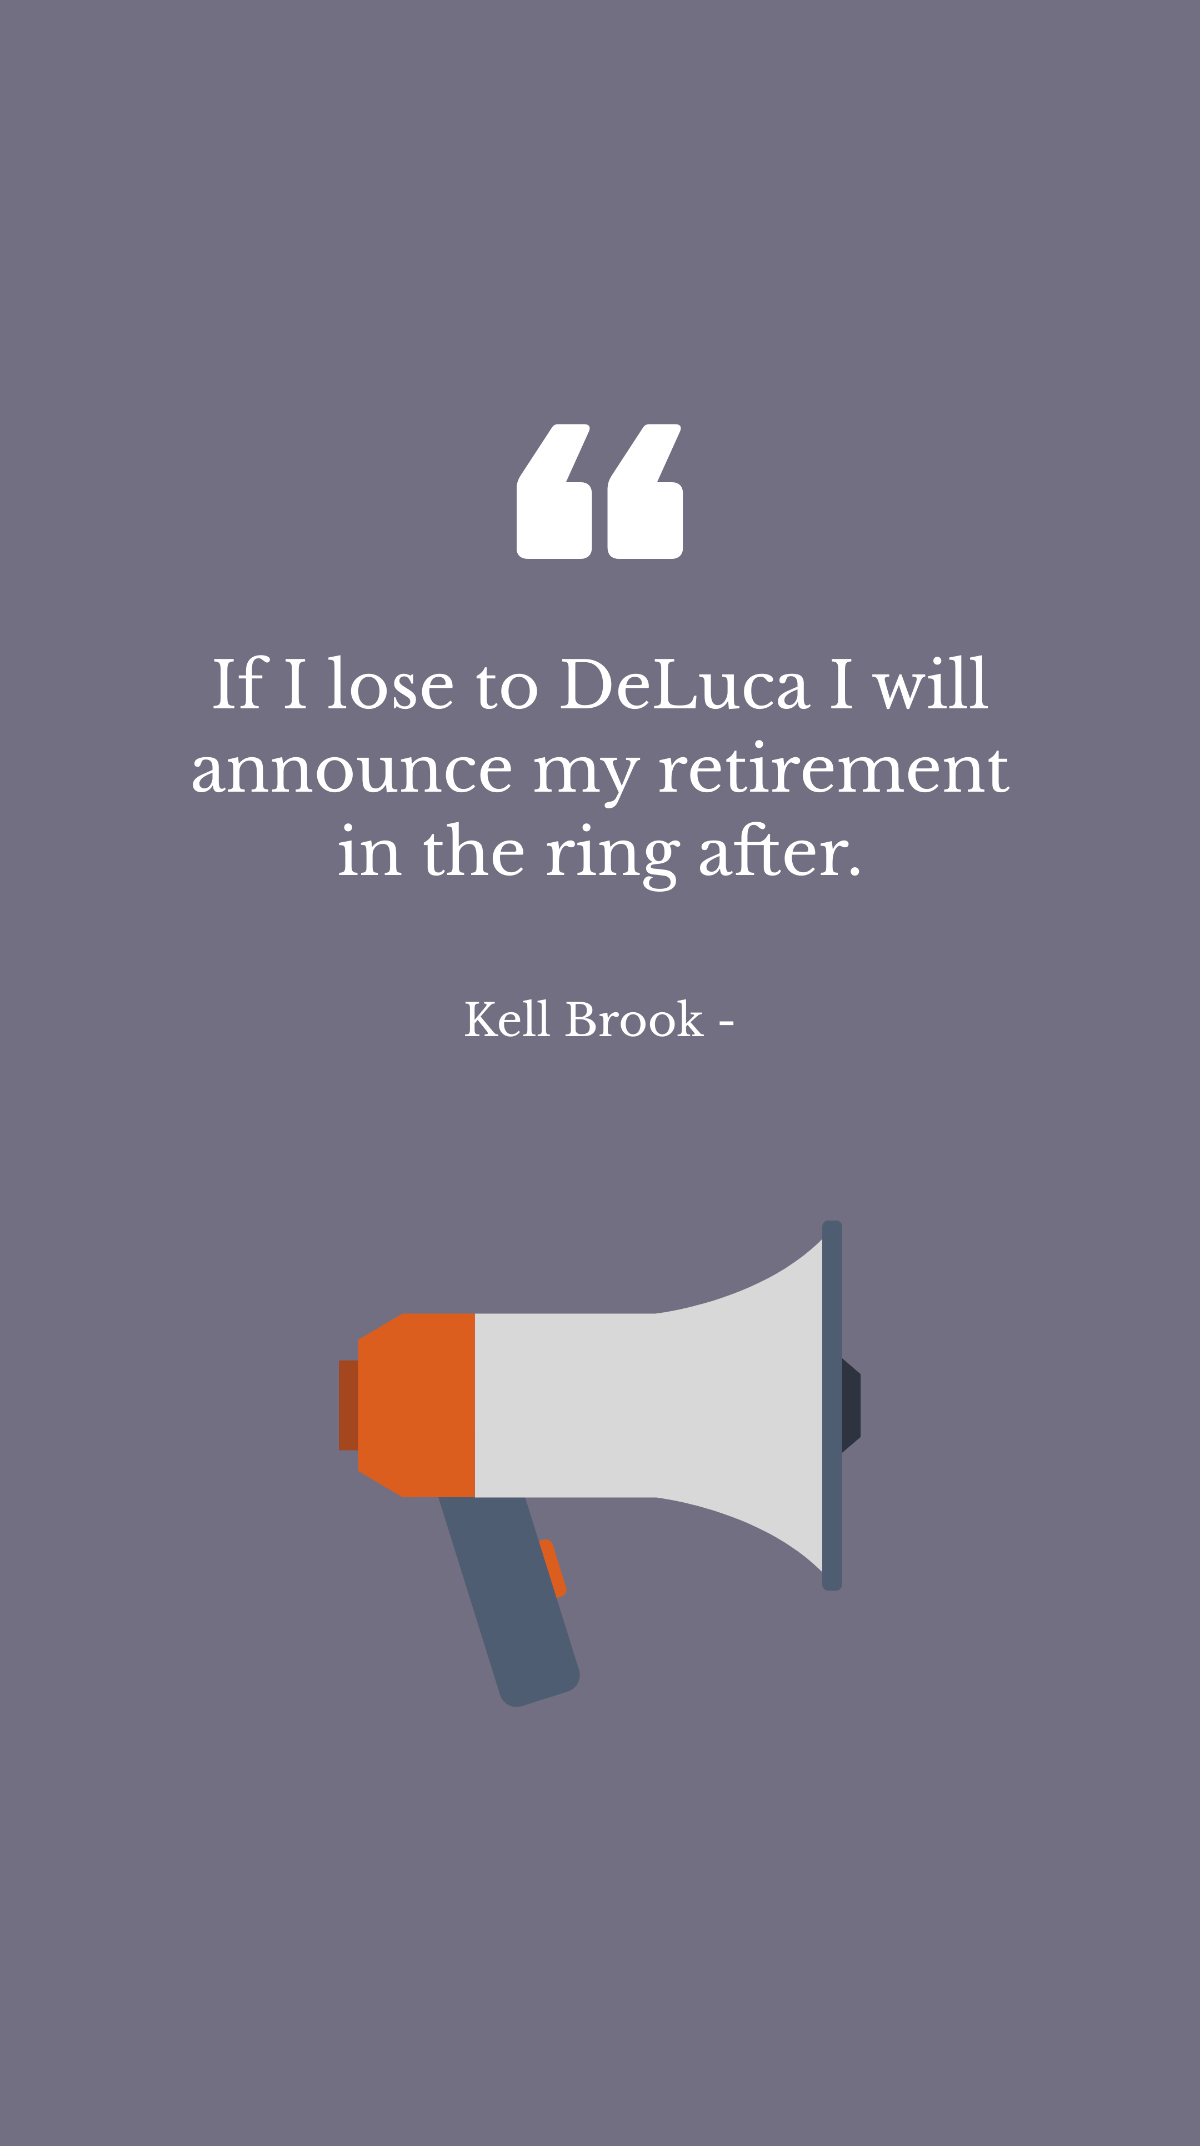 Free Kell Brook - If I lose to DeLuca I will announce my retirement in the ring after. Template